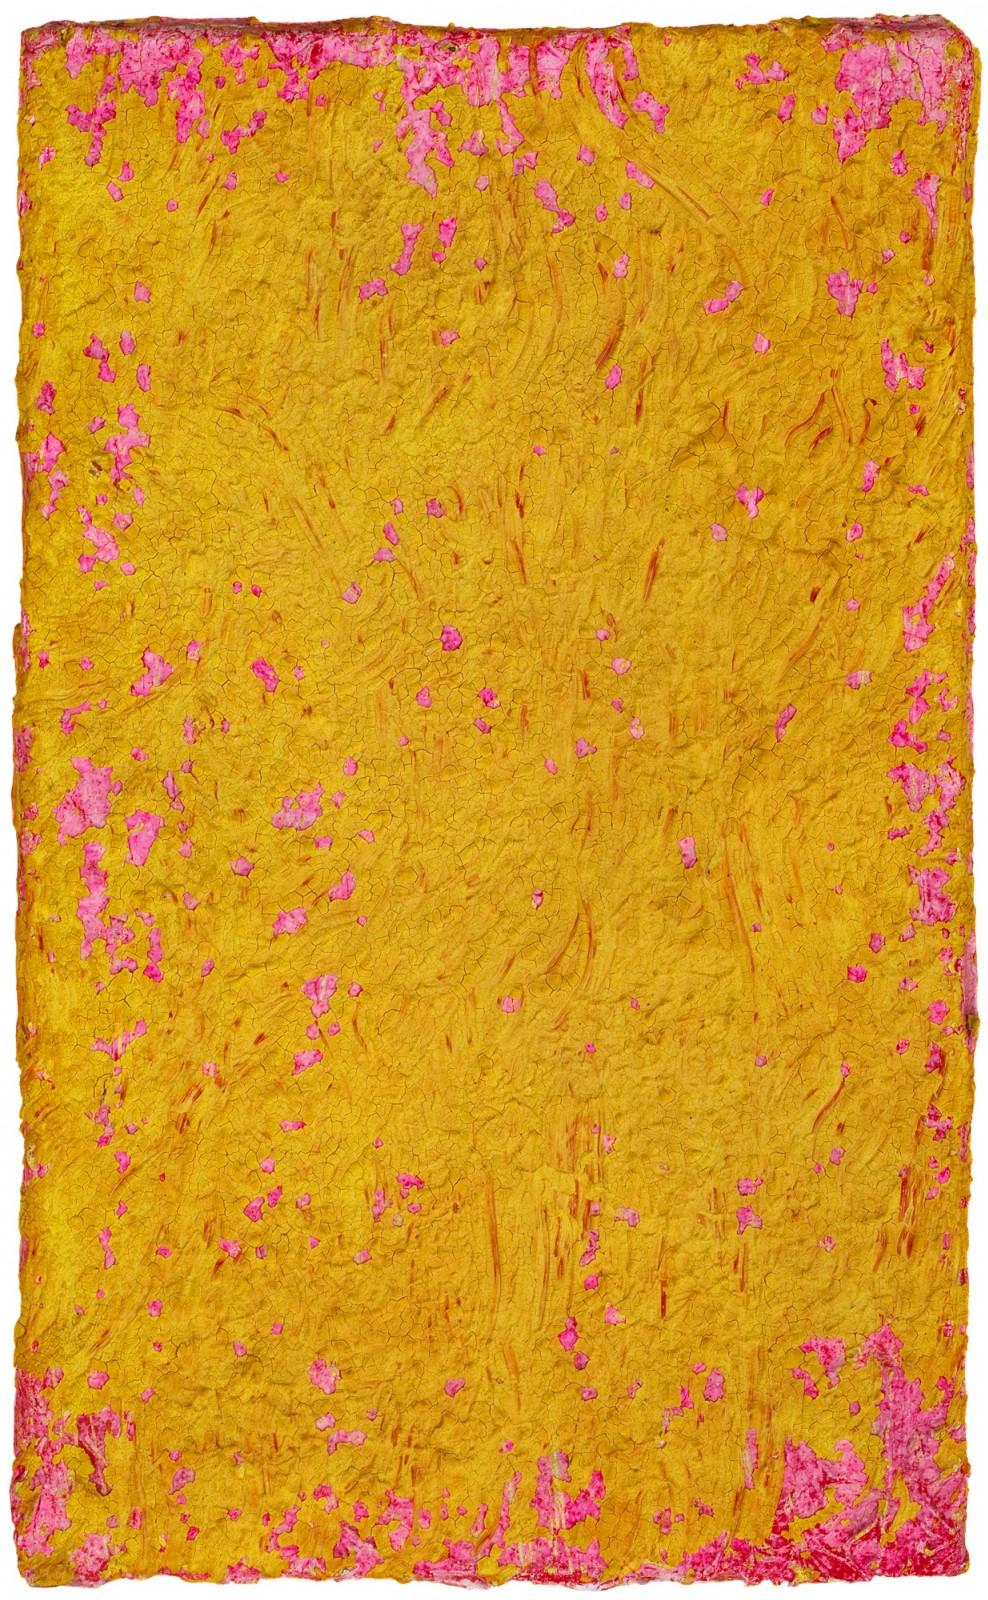 Untitled Yellow and Pink Monochrome (M 36), 1955. Source: Klein, “Untitled Yellow and Pink Monochrome (M 36).”